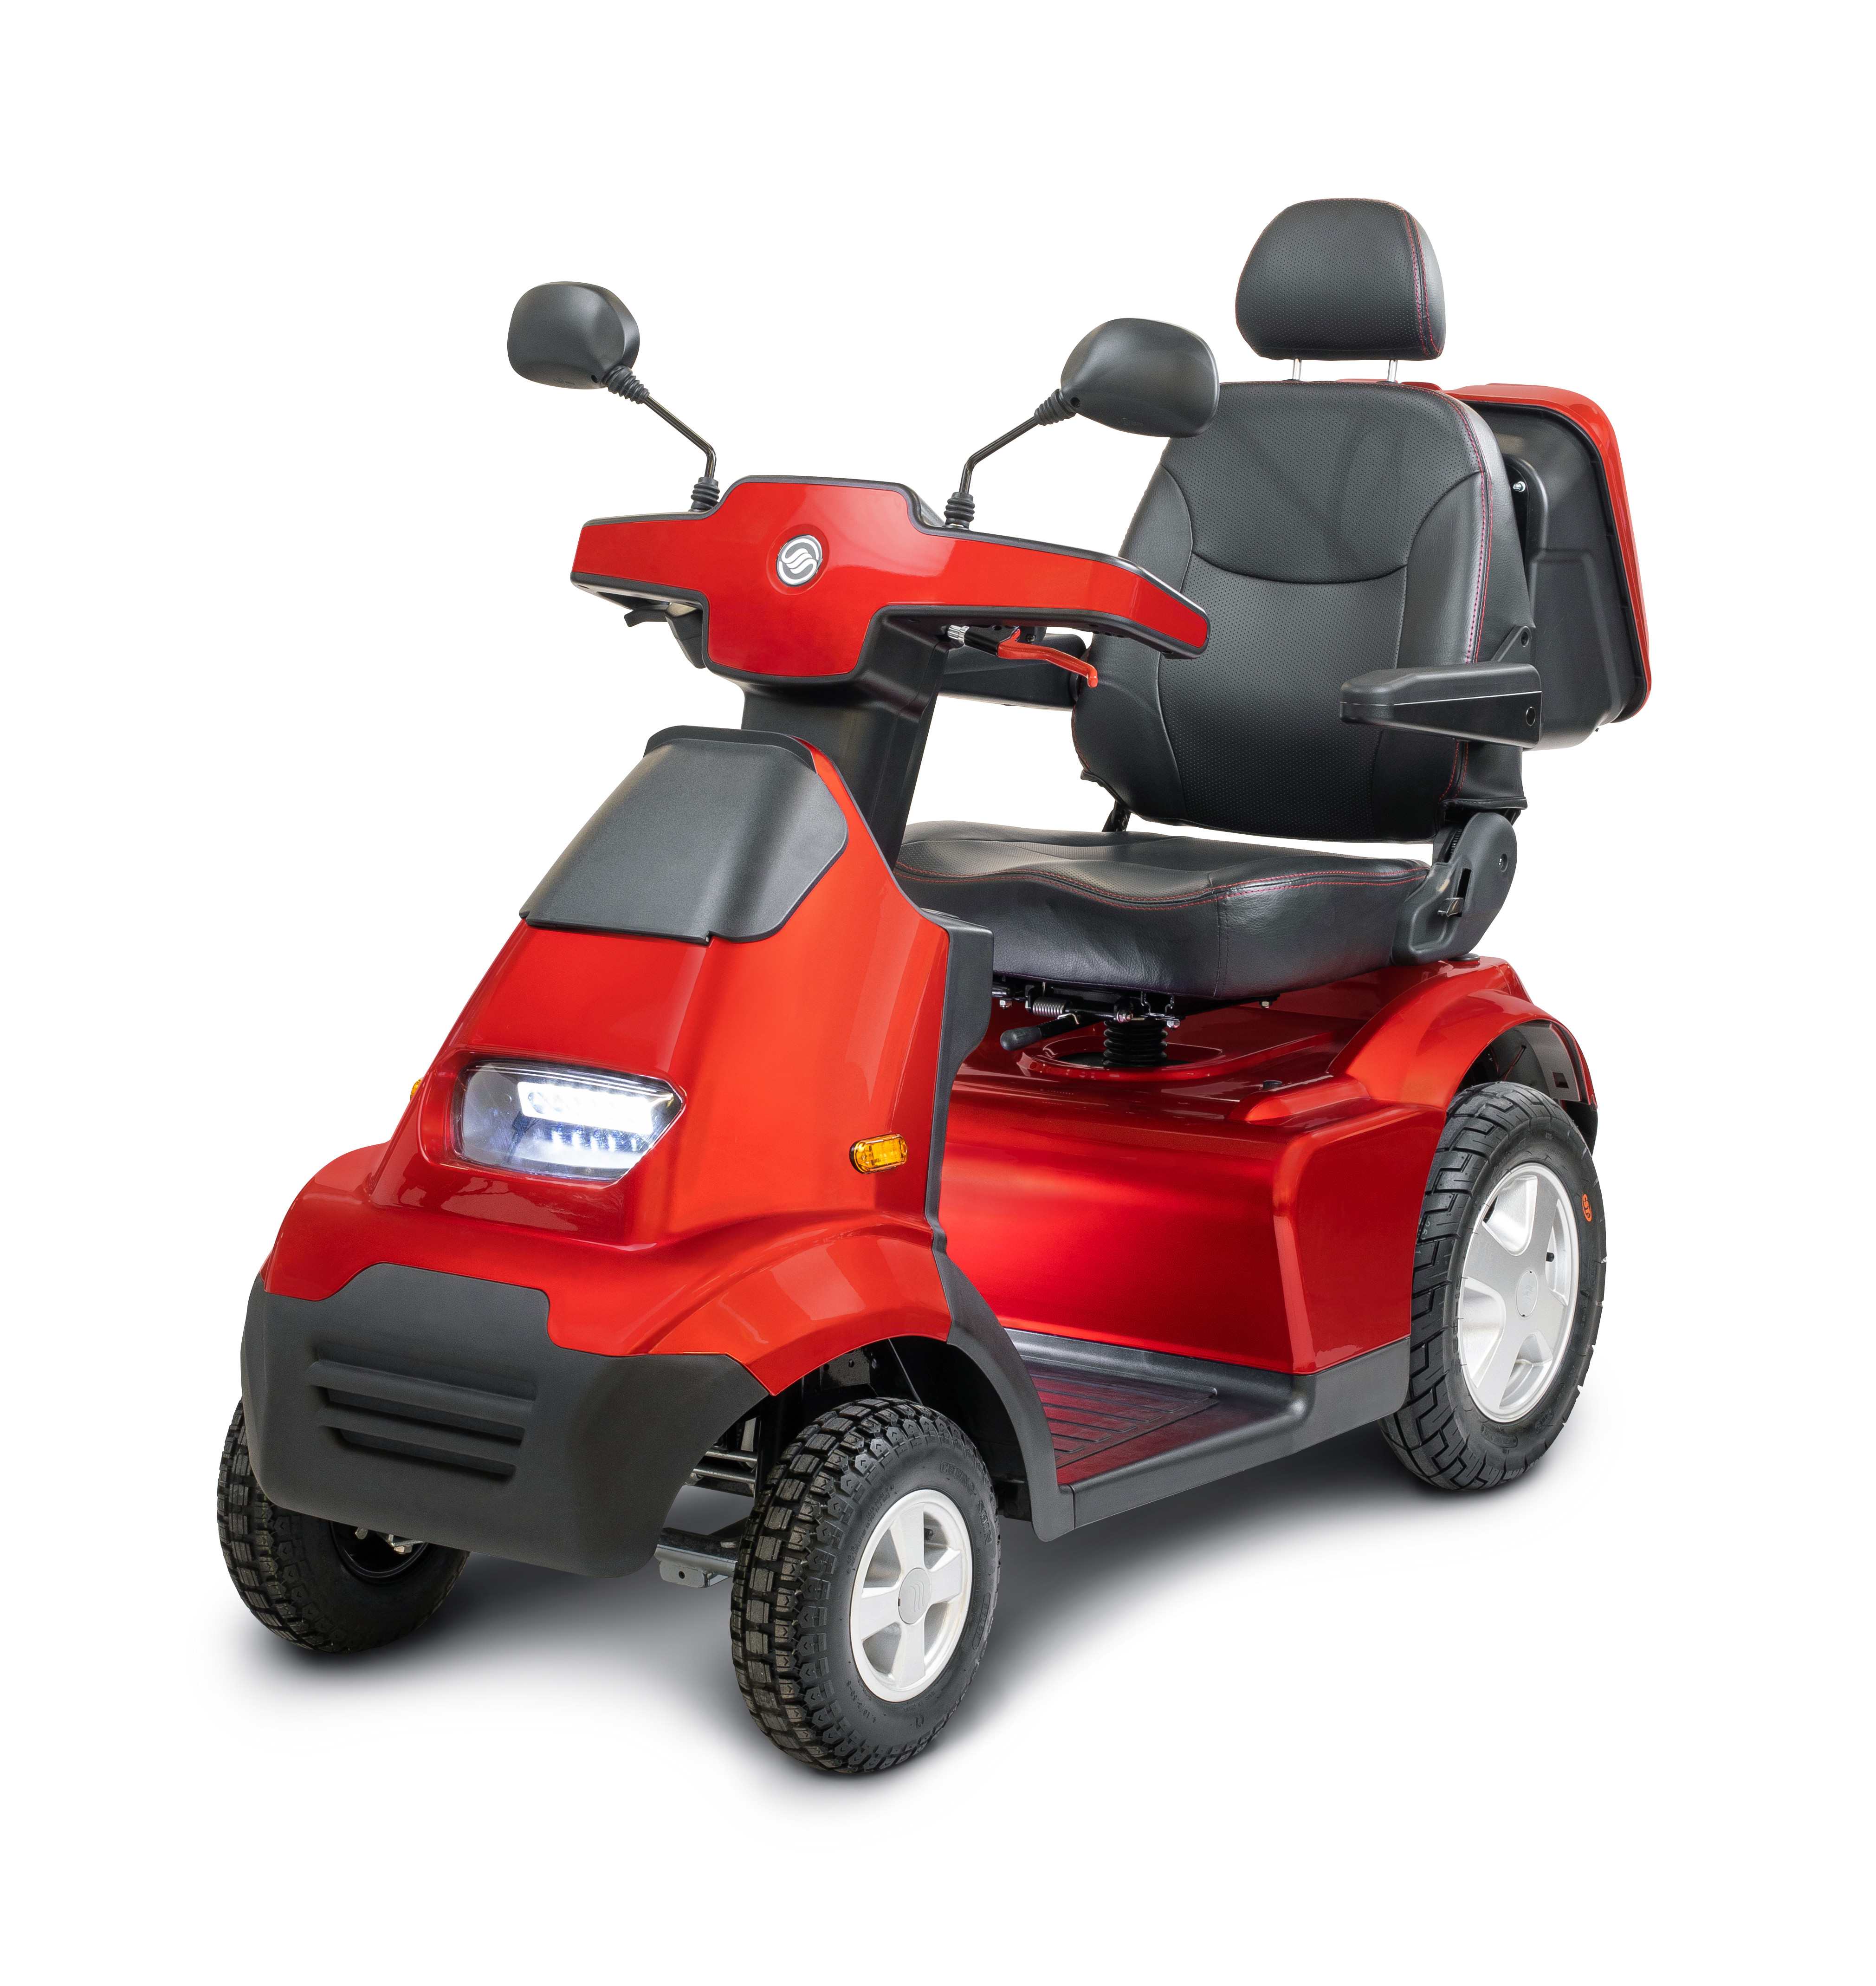 AFISCOOTER S4 Standard 4-Wheel Scooter Red